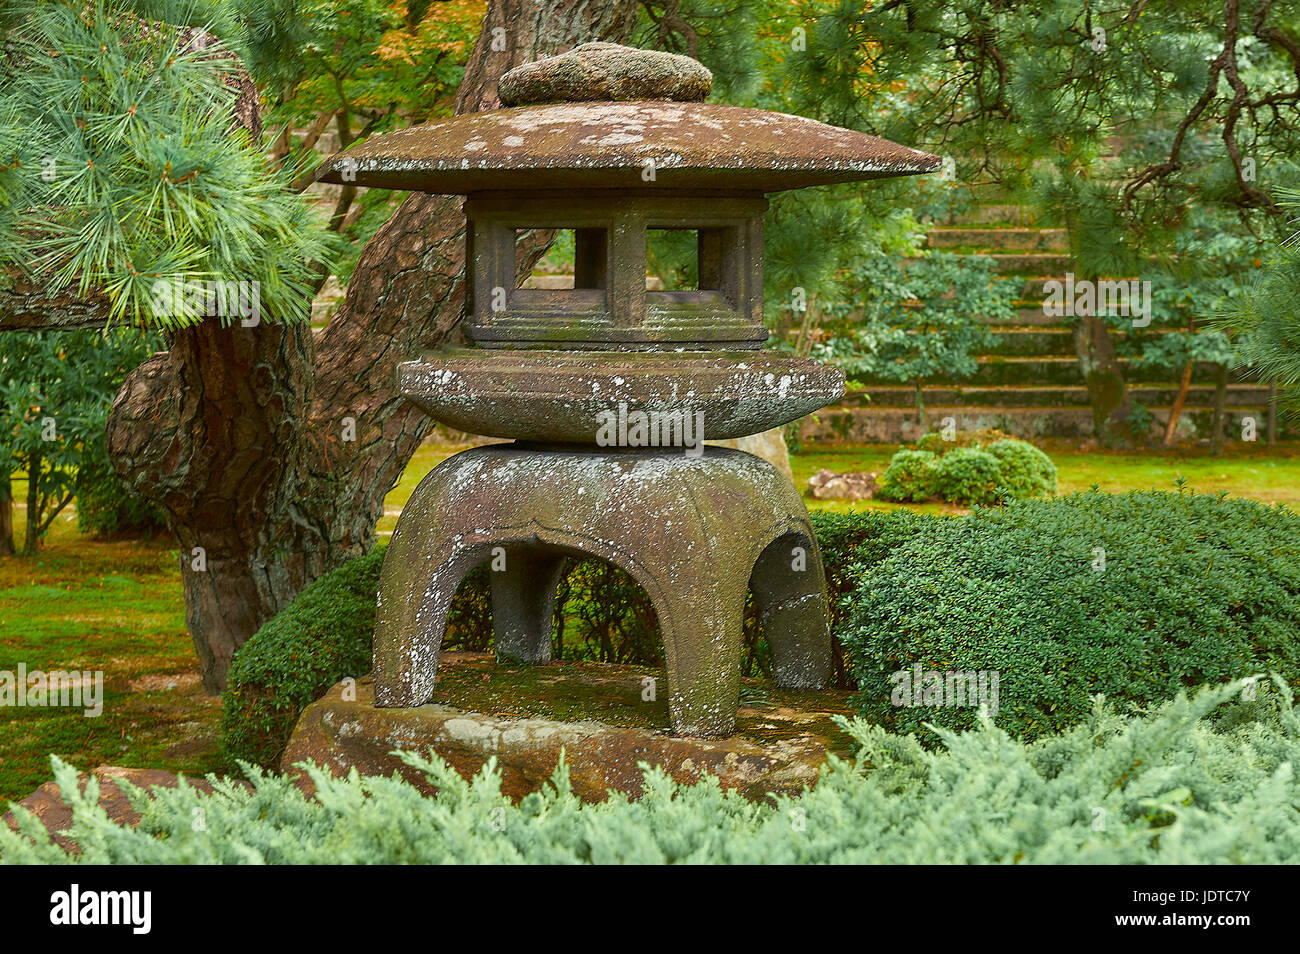 Kyoto, Japan - October21,2016 : A traditional lantern made of stone. An element in Japanese garden. it is considered as an offering to Buddha. Stock Photo